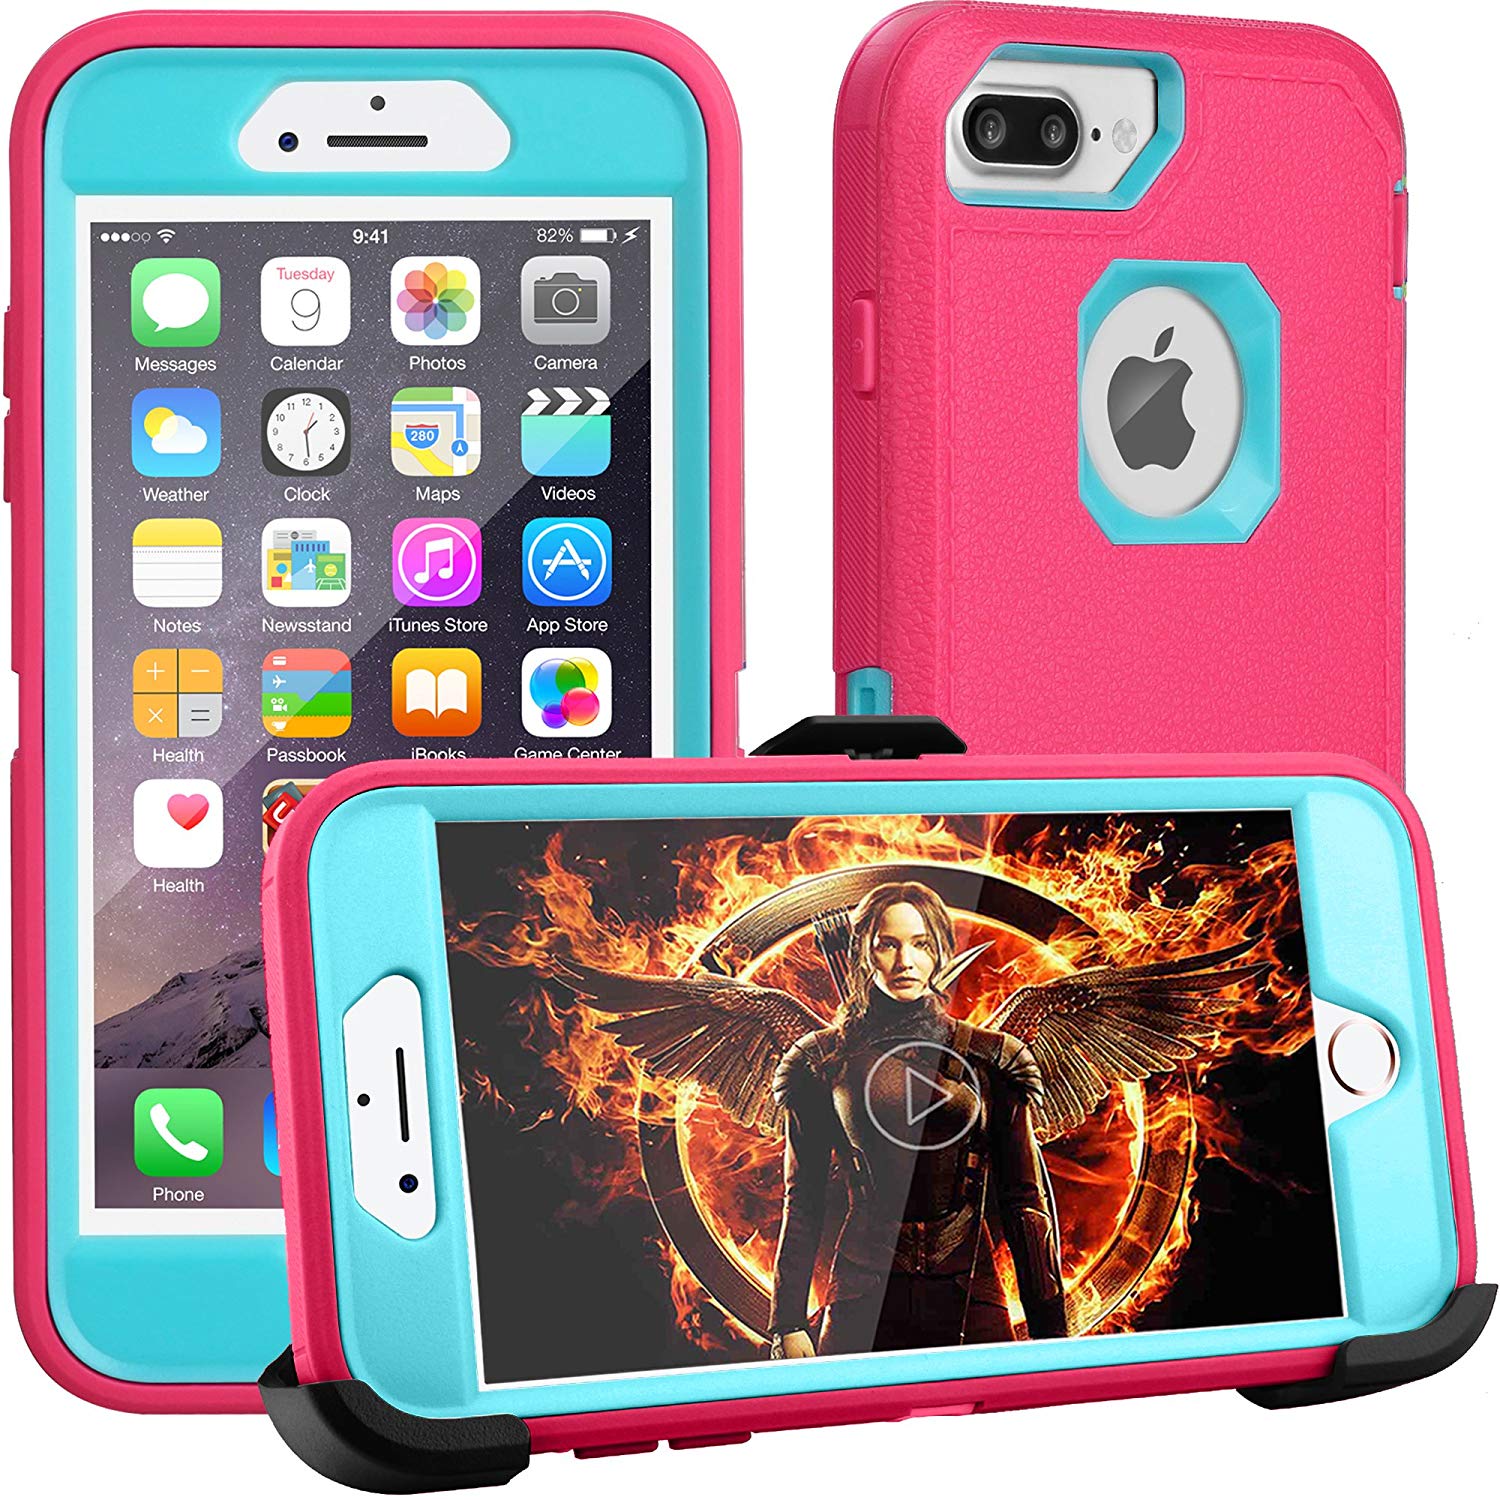 iPhone 8 Plus Case,iPhone 7 Plus Case,iPhone 6s Plus Case,FOGEEK[Dust-Proof] Belt-Clip Heavy Duty Kickstand Cover[Shockproof] for Apple iPhone 8 Plus,iPhone 7 Plus,iPhone 6/6s Plus (Rose and Blue) …